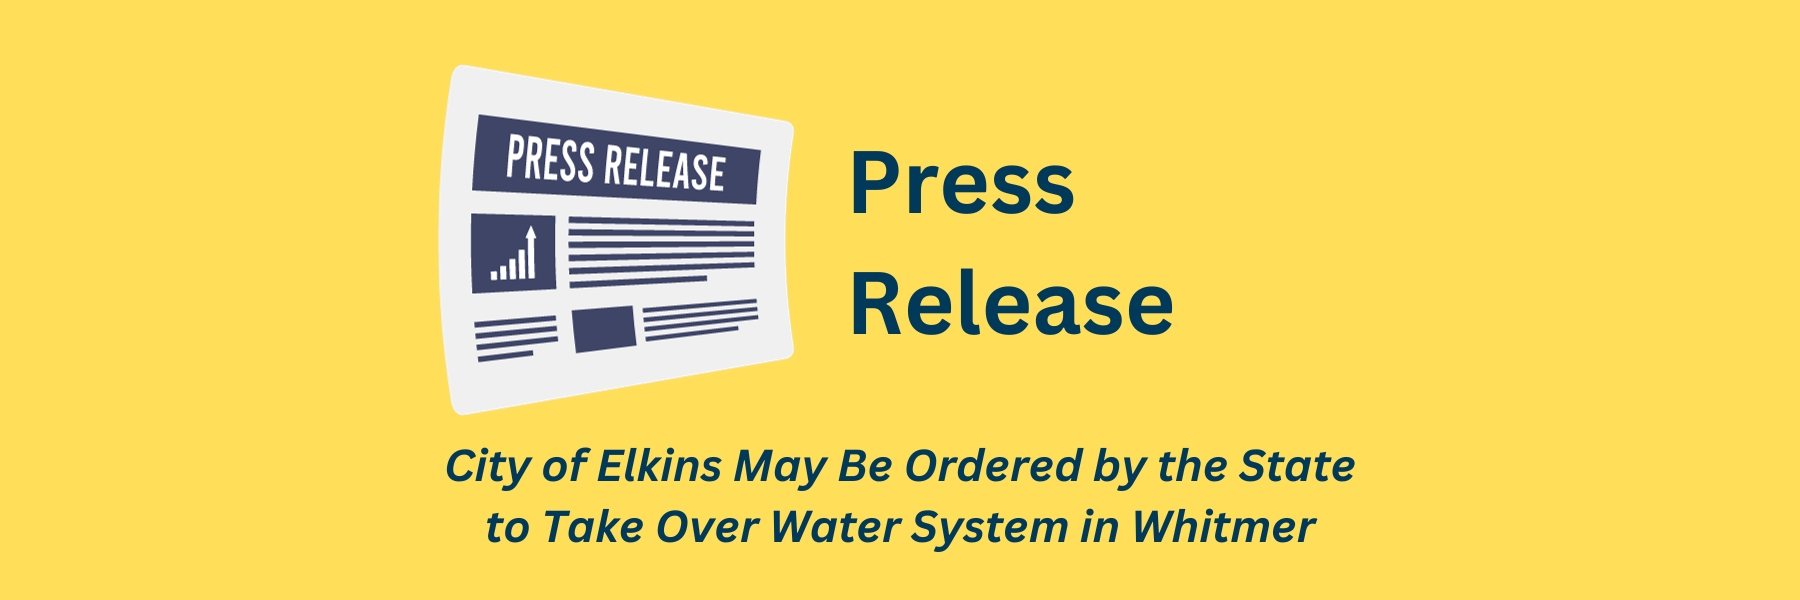 City of Elkins May Be Ordered by the State to Take Over Water System in Whitmer